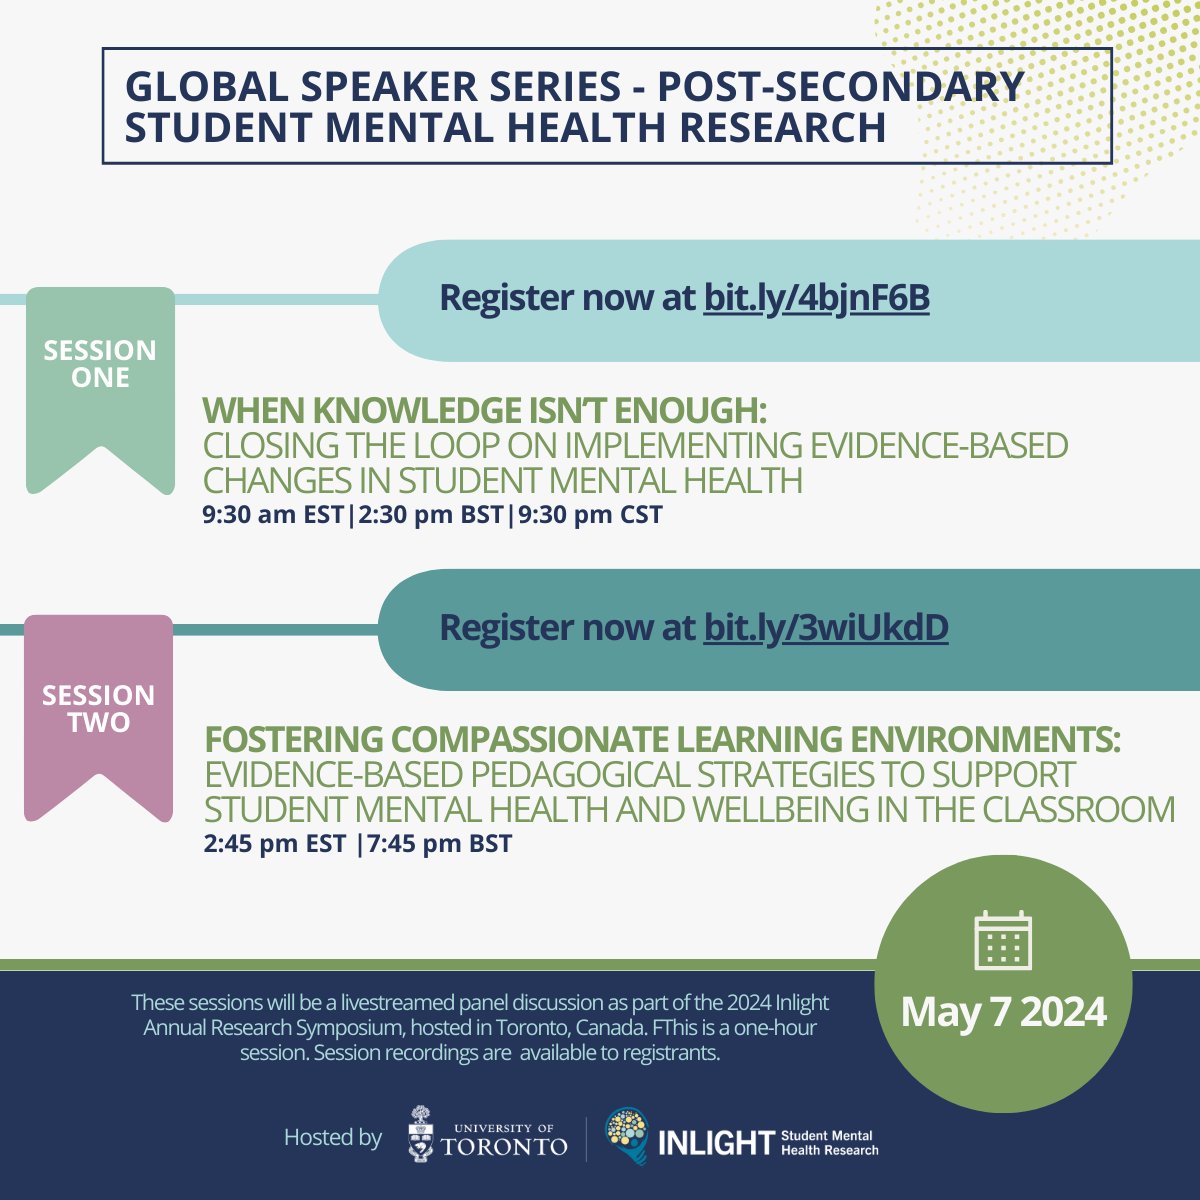 📢The #GlobalSpeakerSeries returns on May 7 for a special two part series during #MentalHealthWeek! Join #UofT researchers + knowledge users for two panel discussions on the latest in #studentmentalhealth research.

Register for each session below or at smhr.utoronto.ca/global-researc…